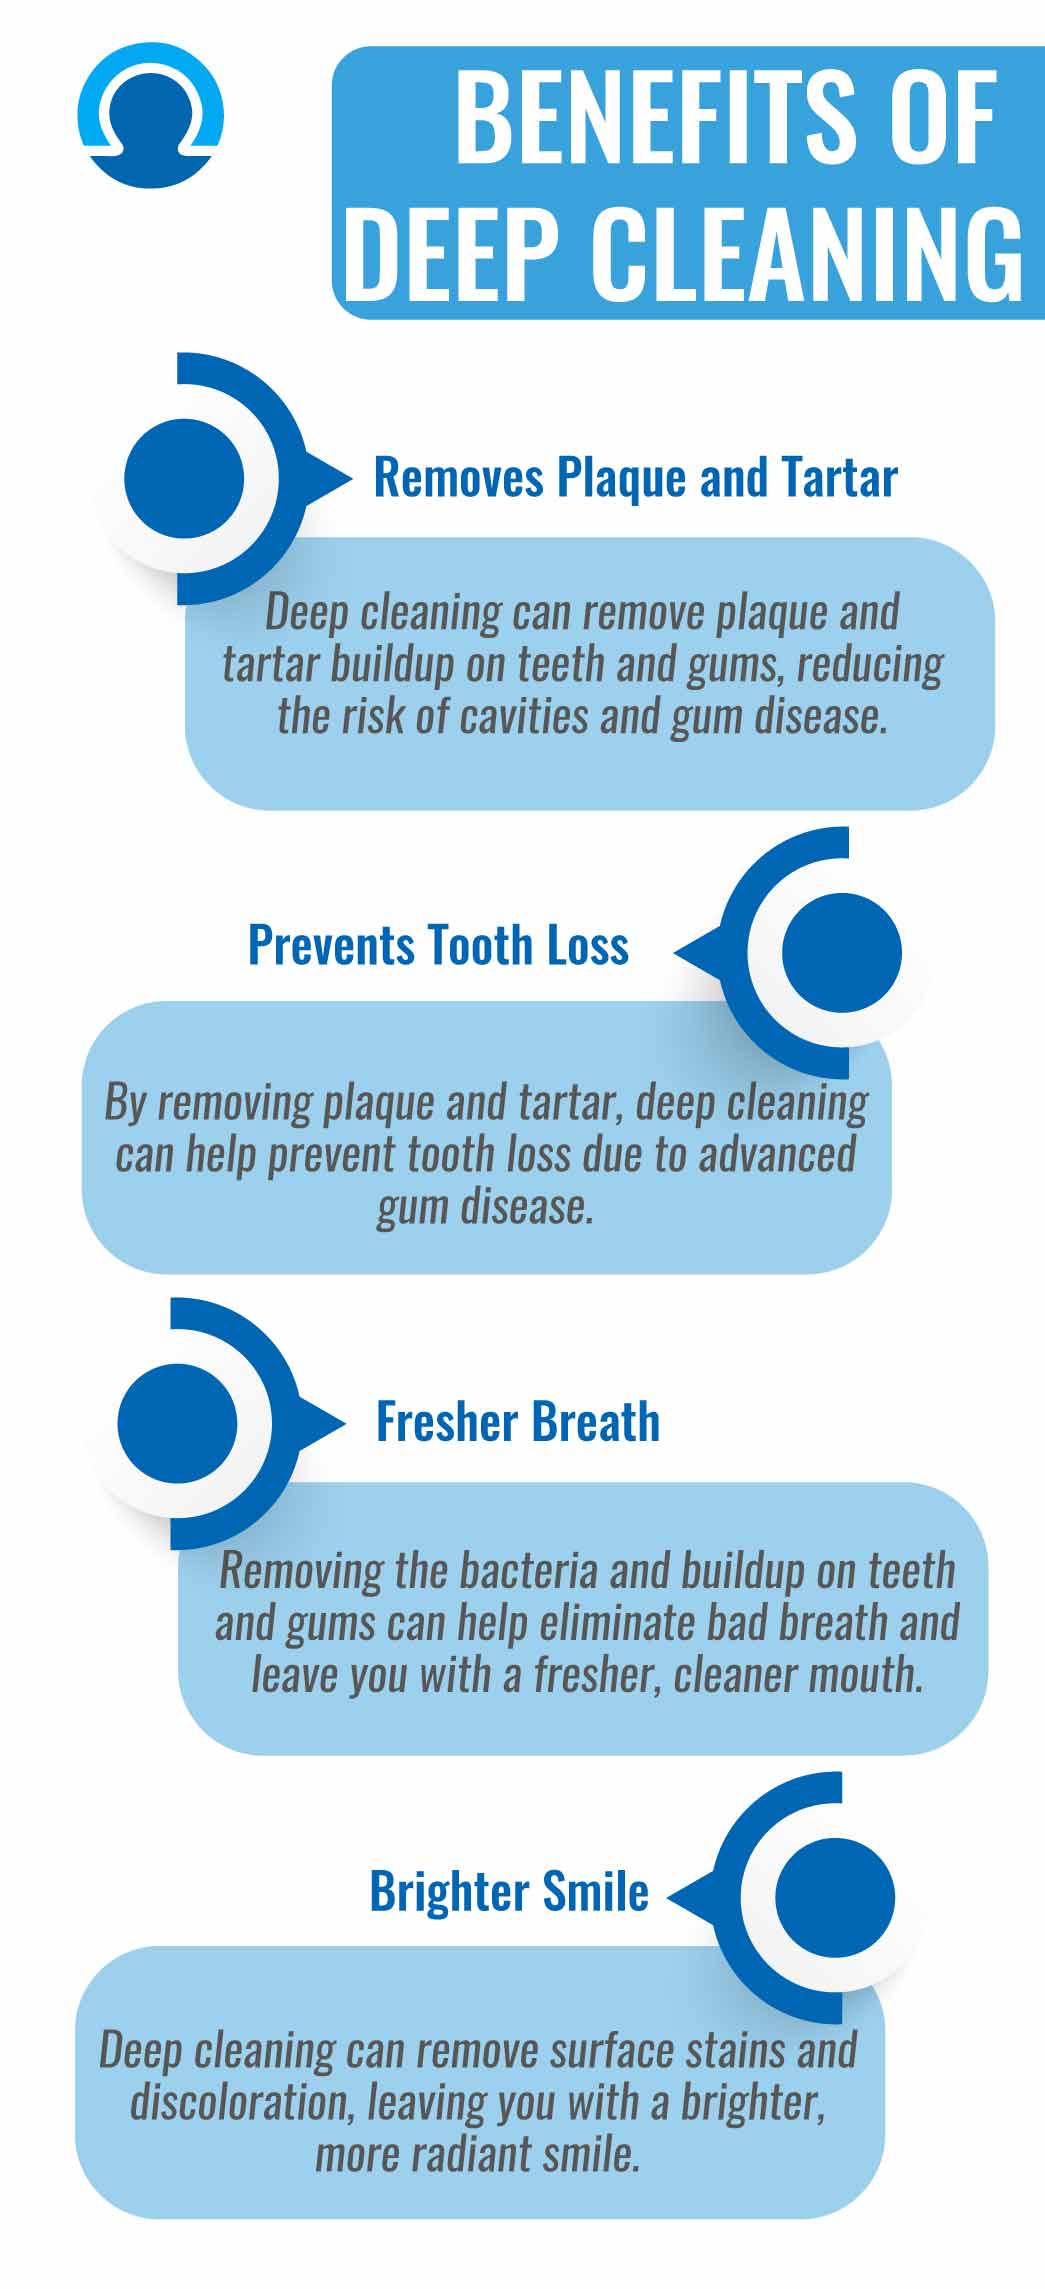 Benefits of Dental Deep Cleaning in Houston, Texas